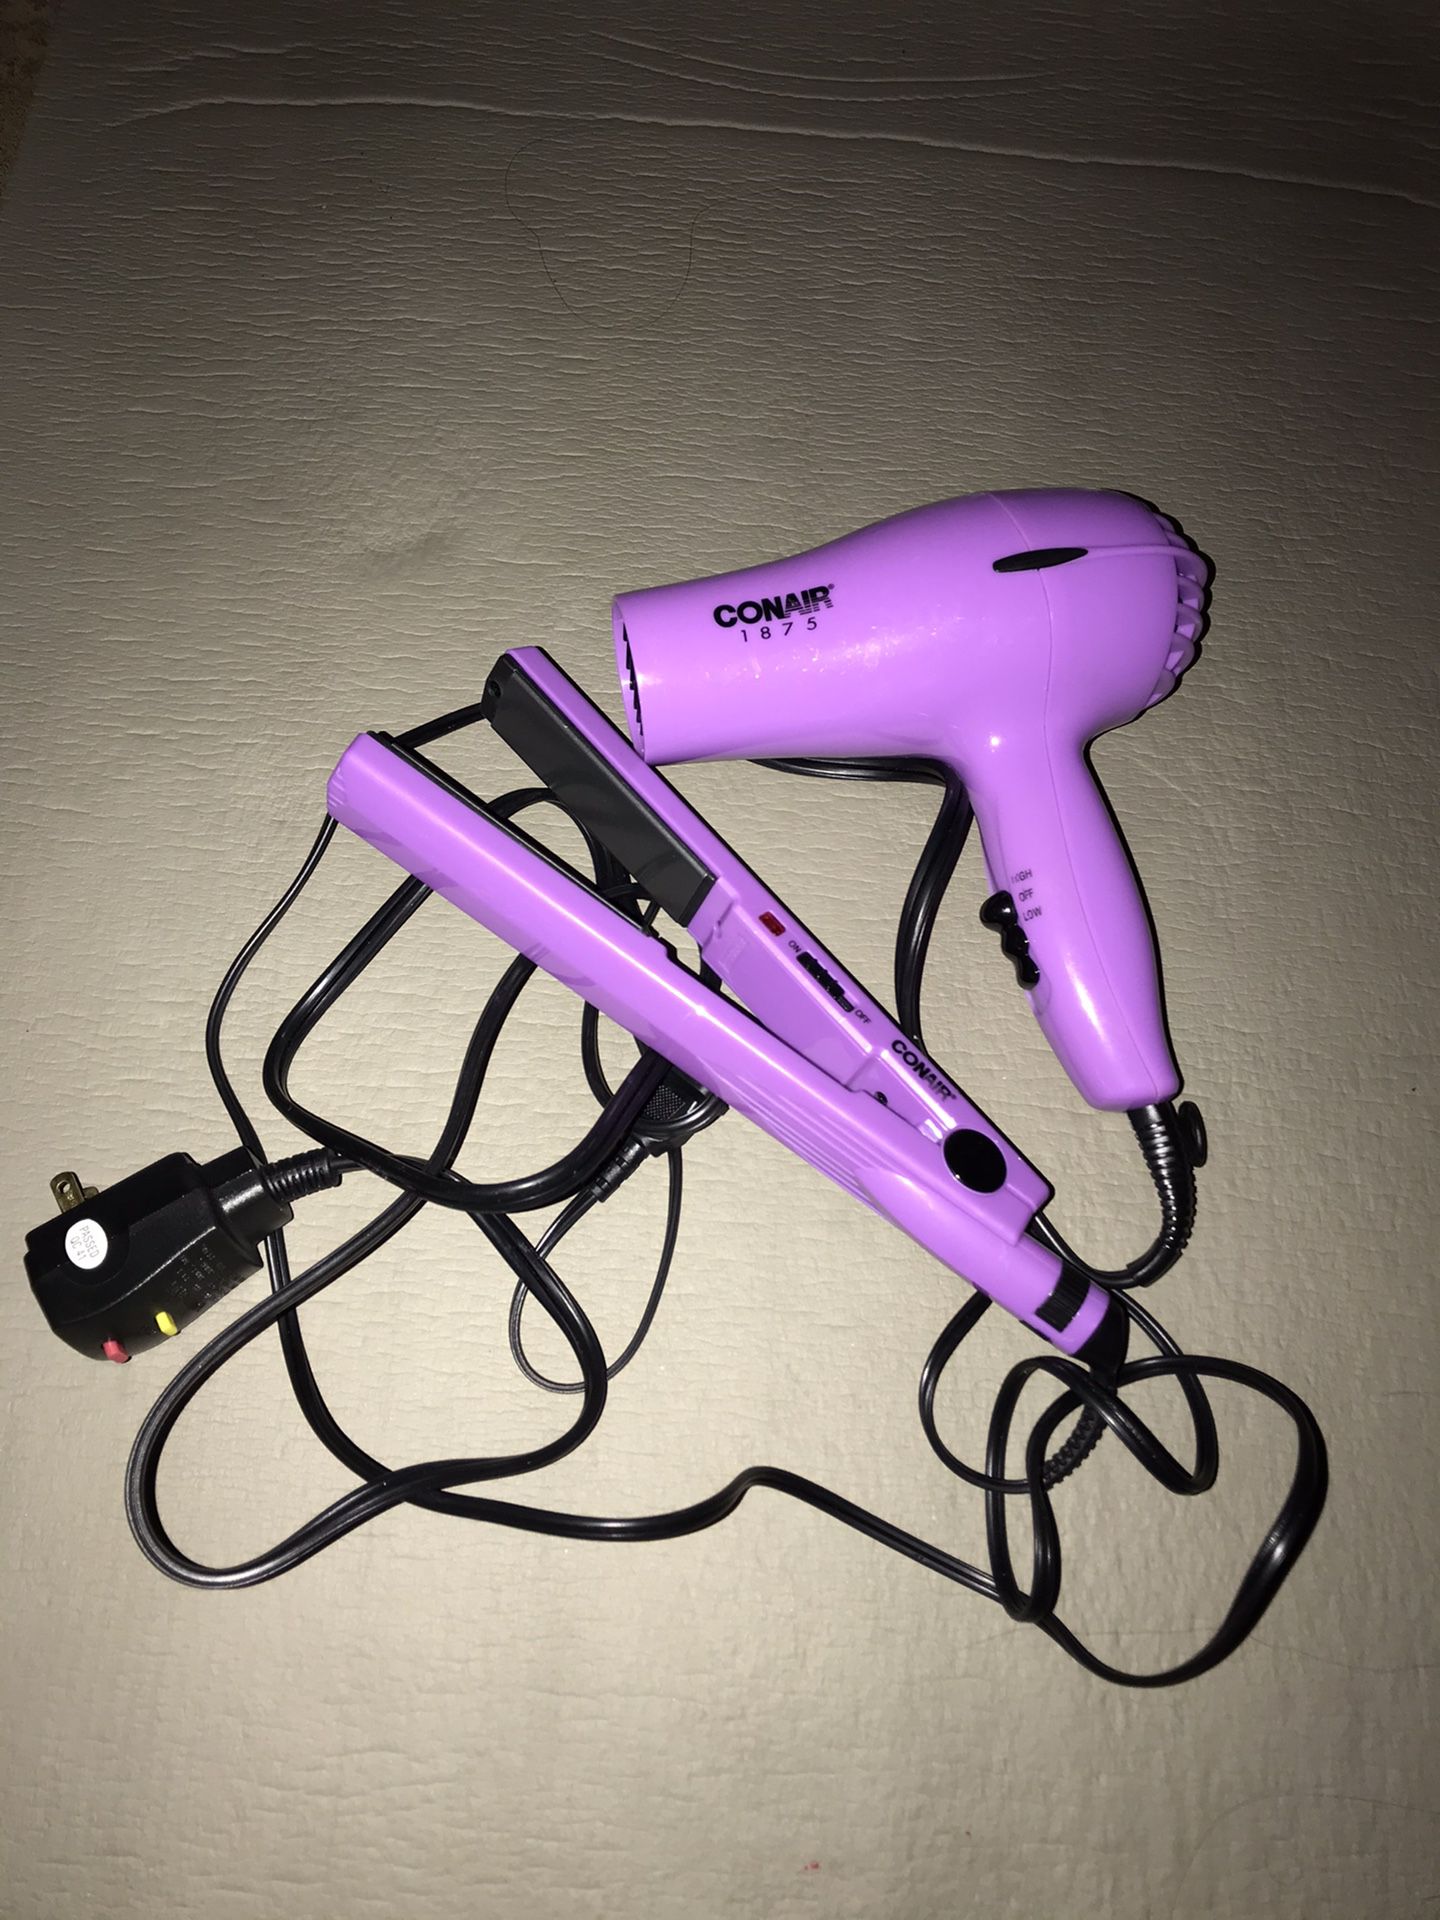 Conair blower and straightener iron for hair. Both excellent condition like new